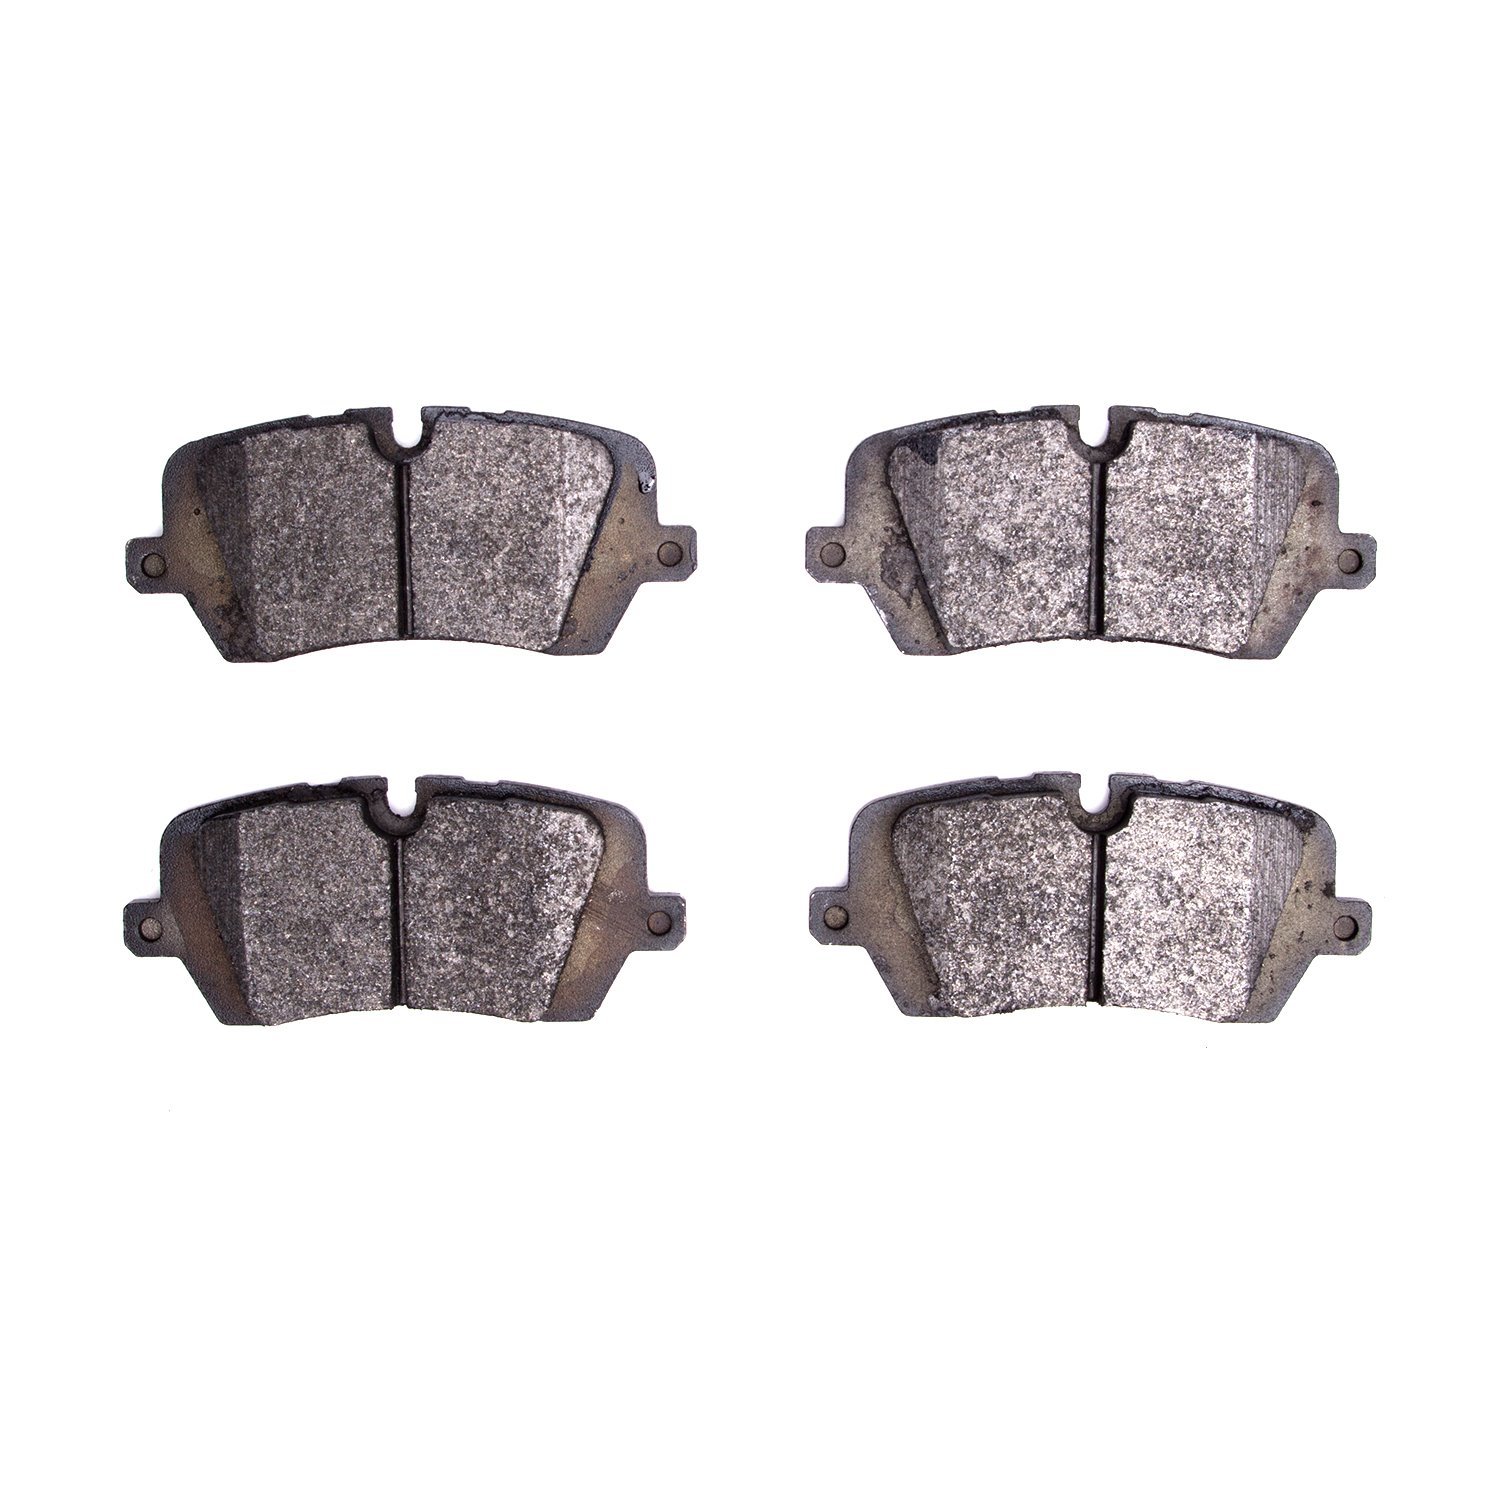 Euro Ceramic Brake Pads, Fits Select Land Rover, Position: Rear